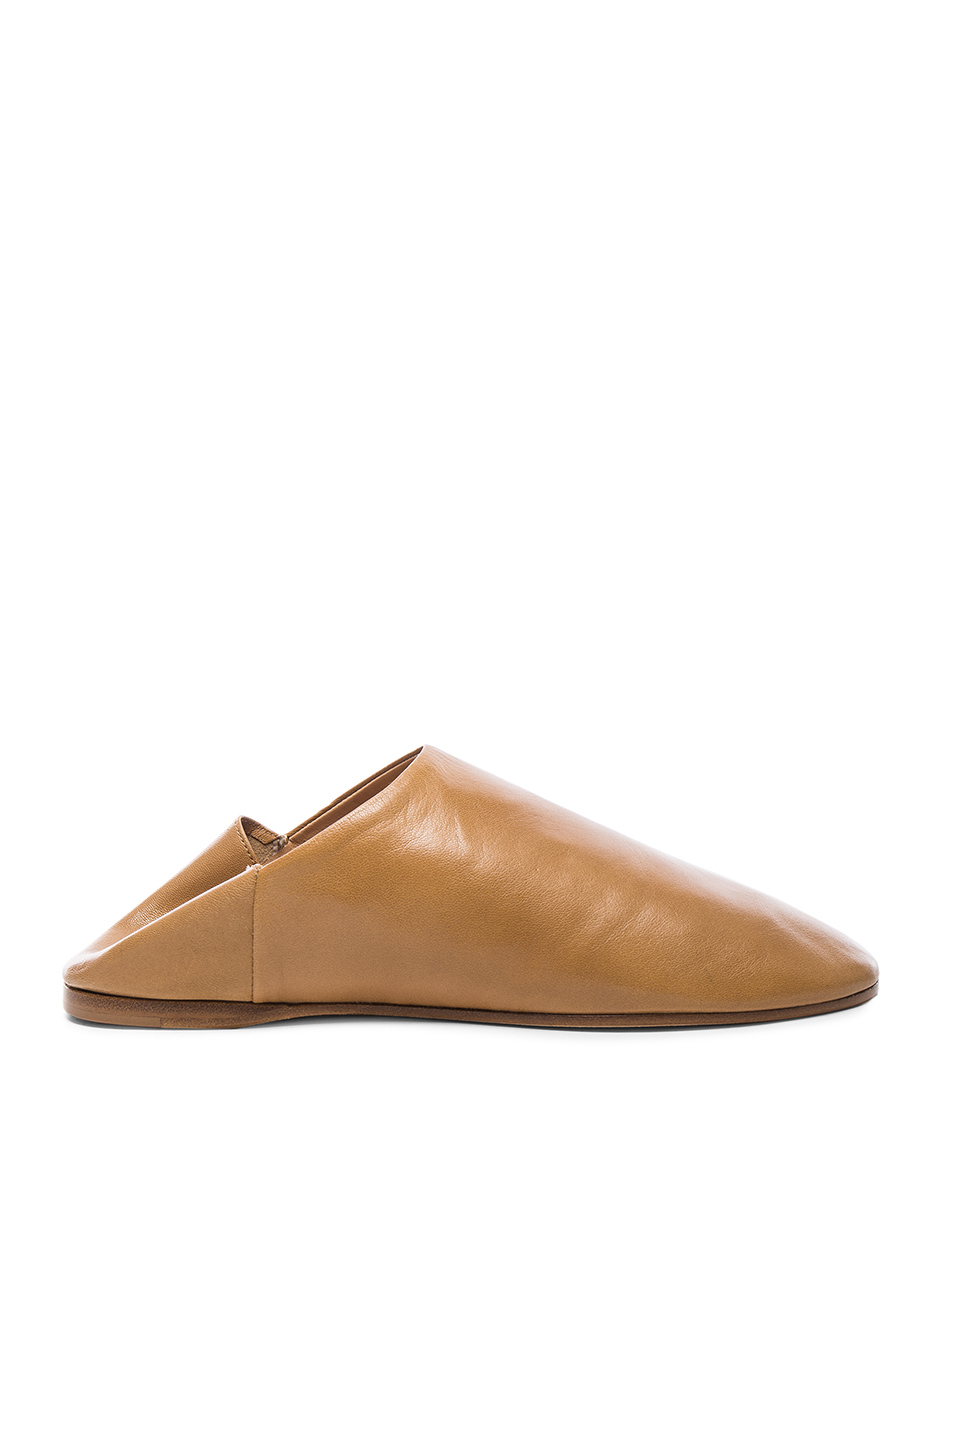 Leather Agata Babouche Slippers, Camel | ModeSens